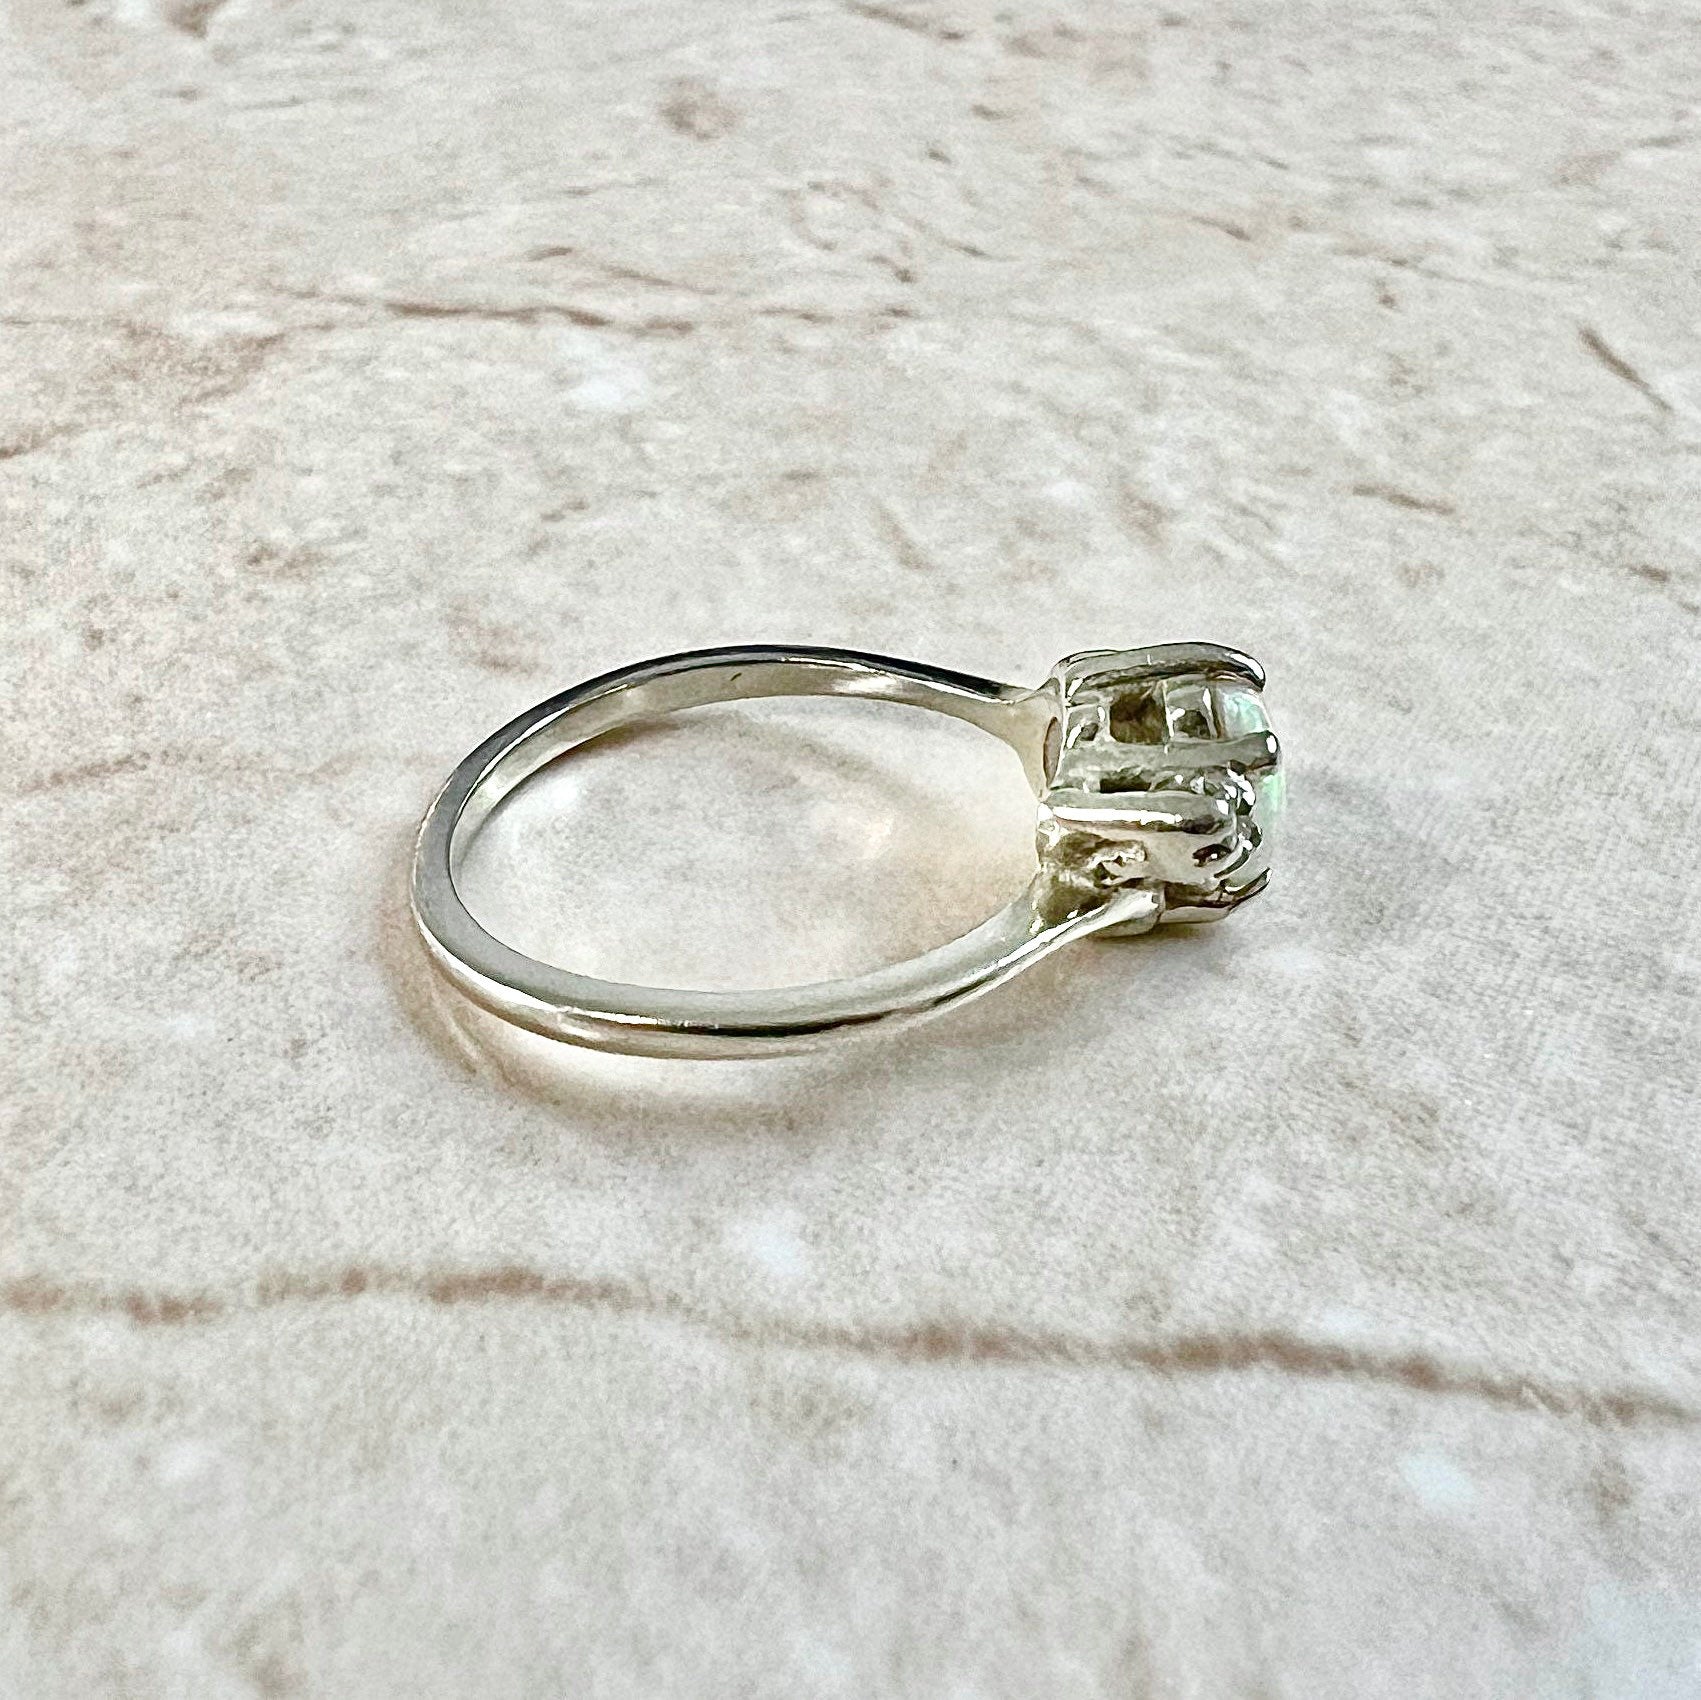 14K Diamond & Natural Opal Ring - 14K White Gold Cocktail Ring - 14K Opal Solitaire Ring - October Birthstone Ring - Birthday Gift